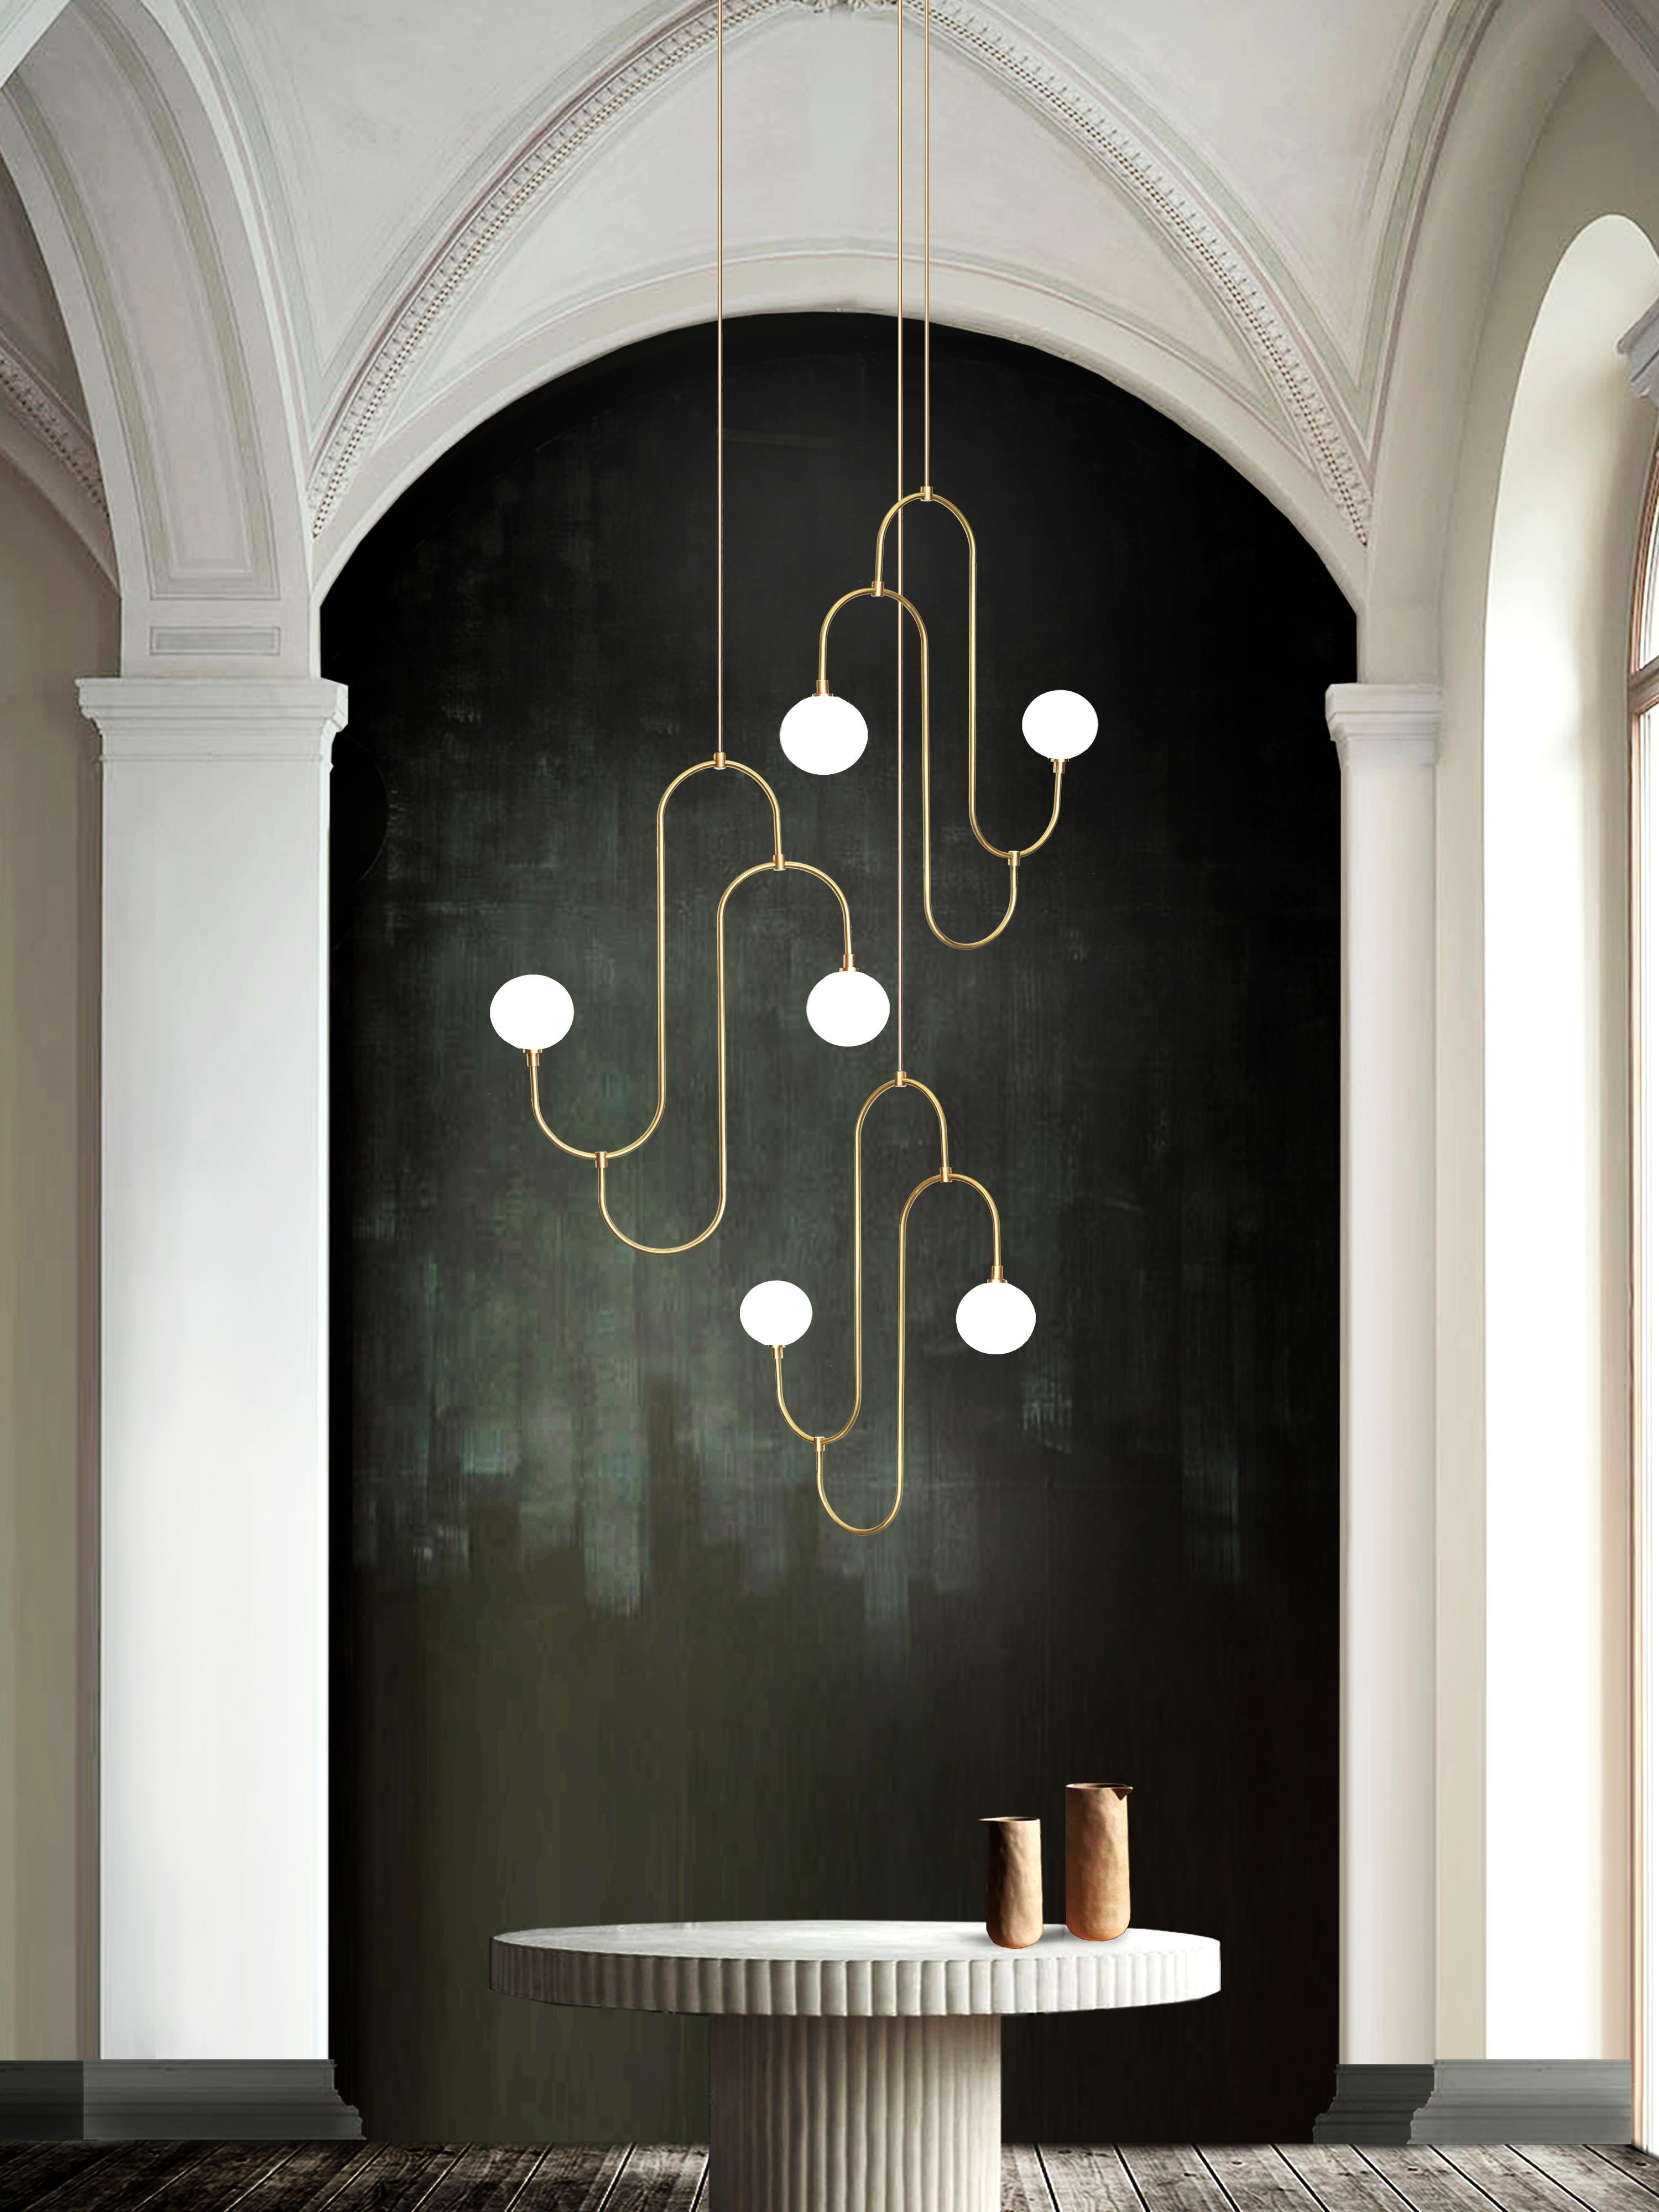 Inspired by the repeated patterns and sculptural form of 1930s jewelry design. The pendant incorporates hand bent brass arms that hold pearl white crystal glass, creating a decorative, functional lighting feature. 

G12 LED bulb
Lumens: